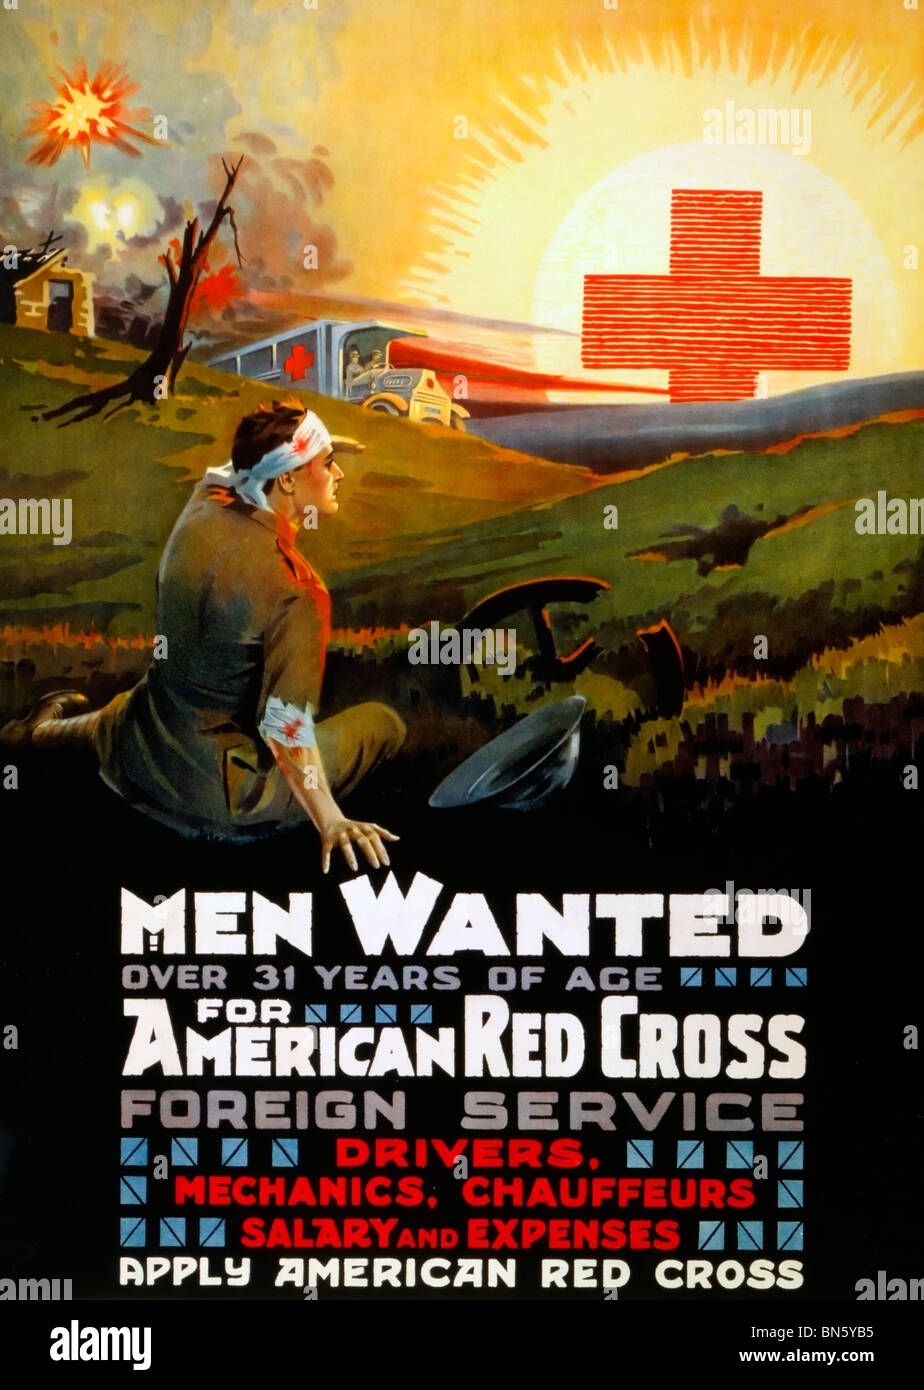 Men wanted over 31 years of age for American Red Cross foreign service - World War I Poster Stock Photo